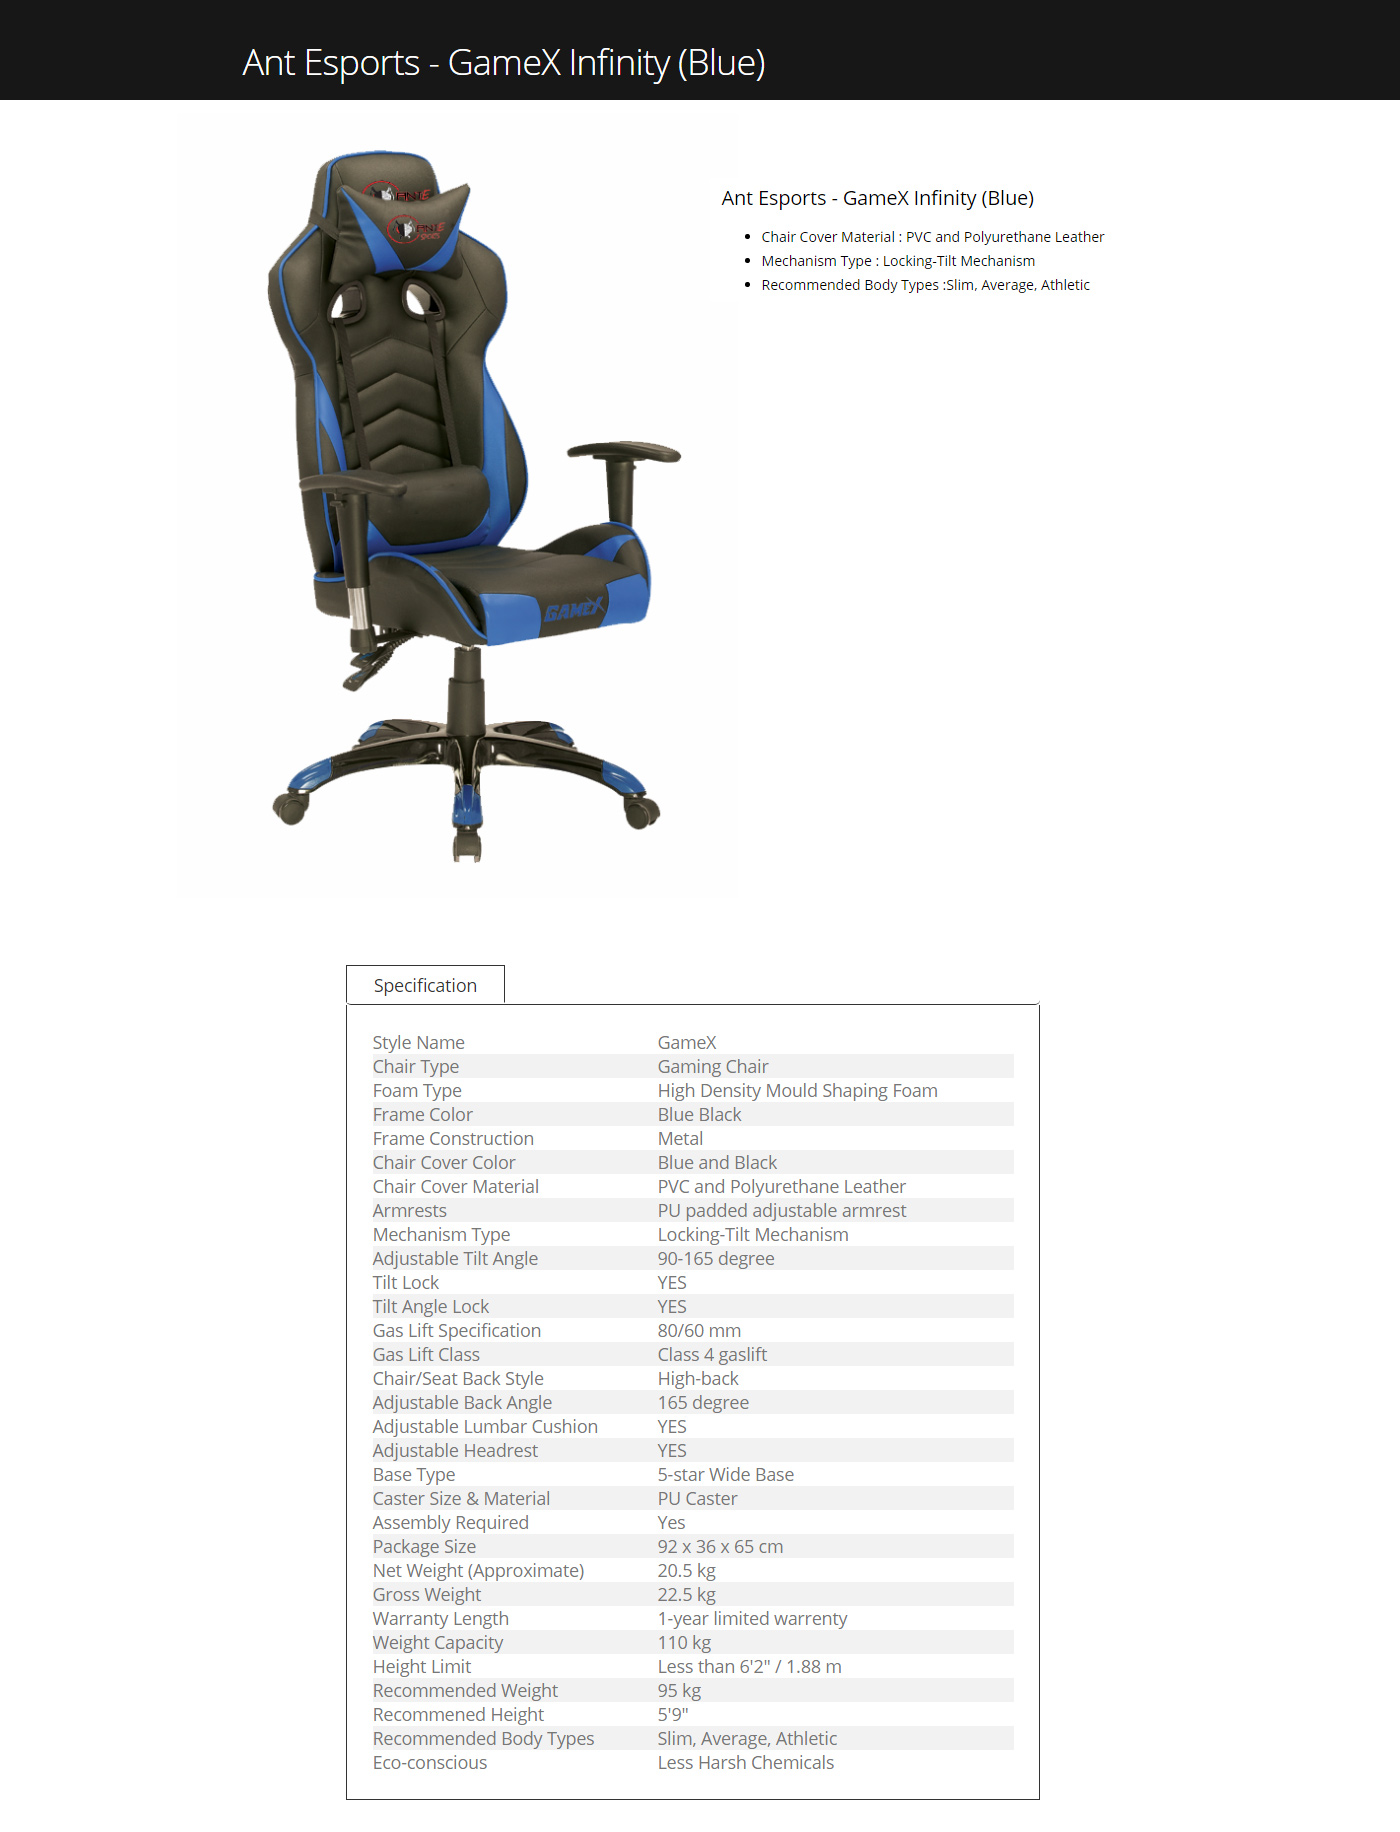  Buy Online Ant Esports GameX Infinity Gaming Chair - Blue